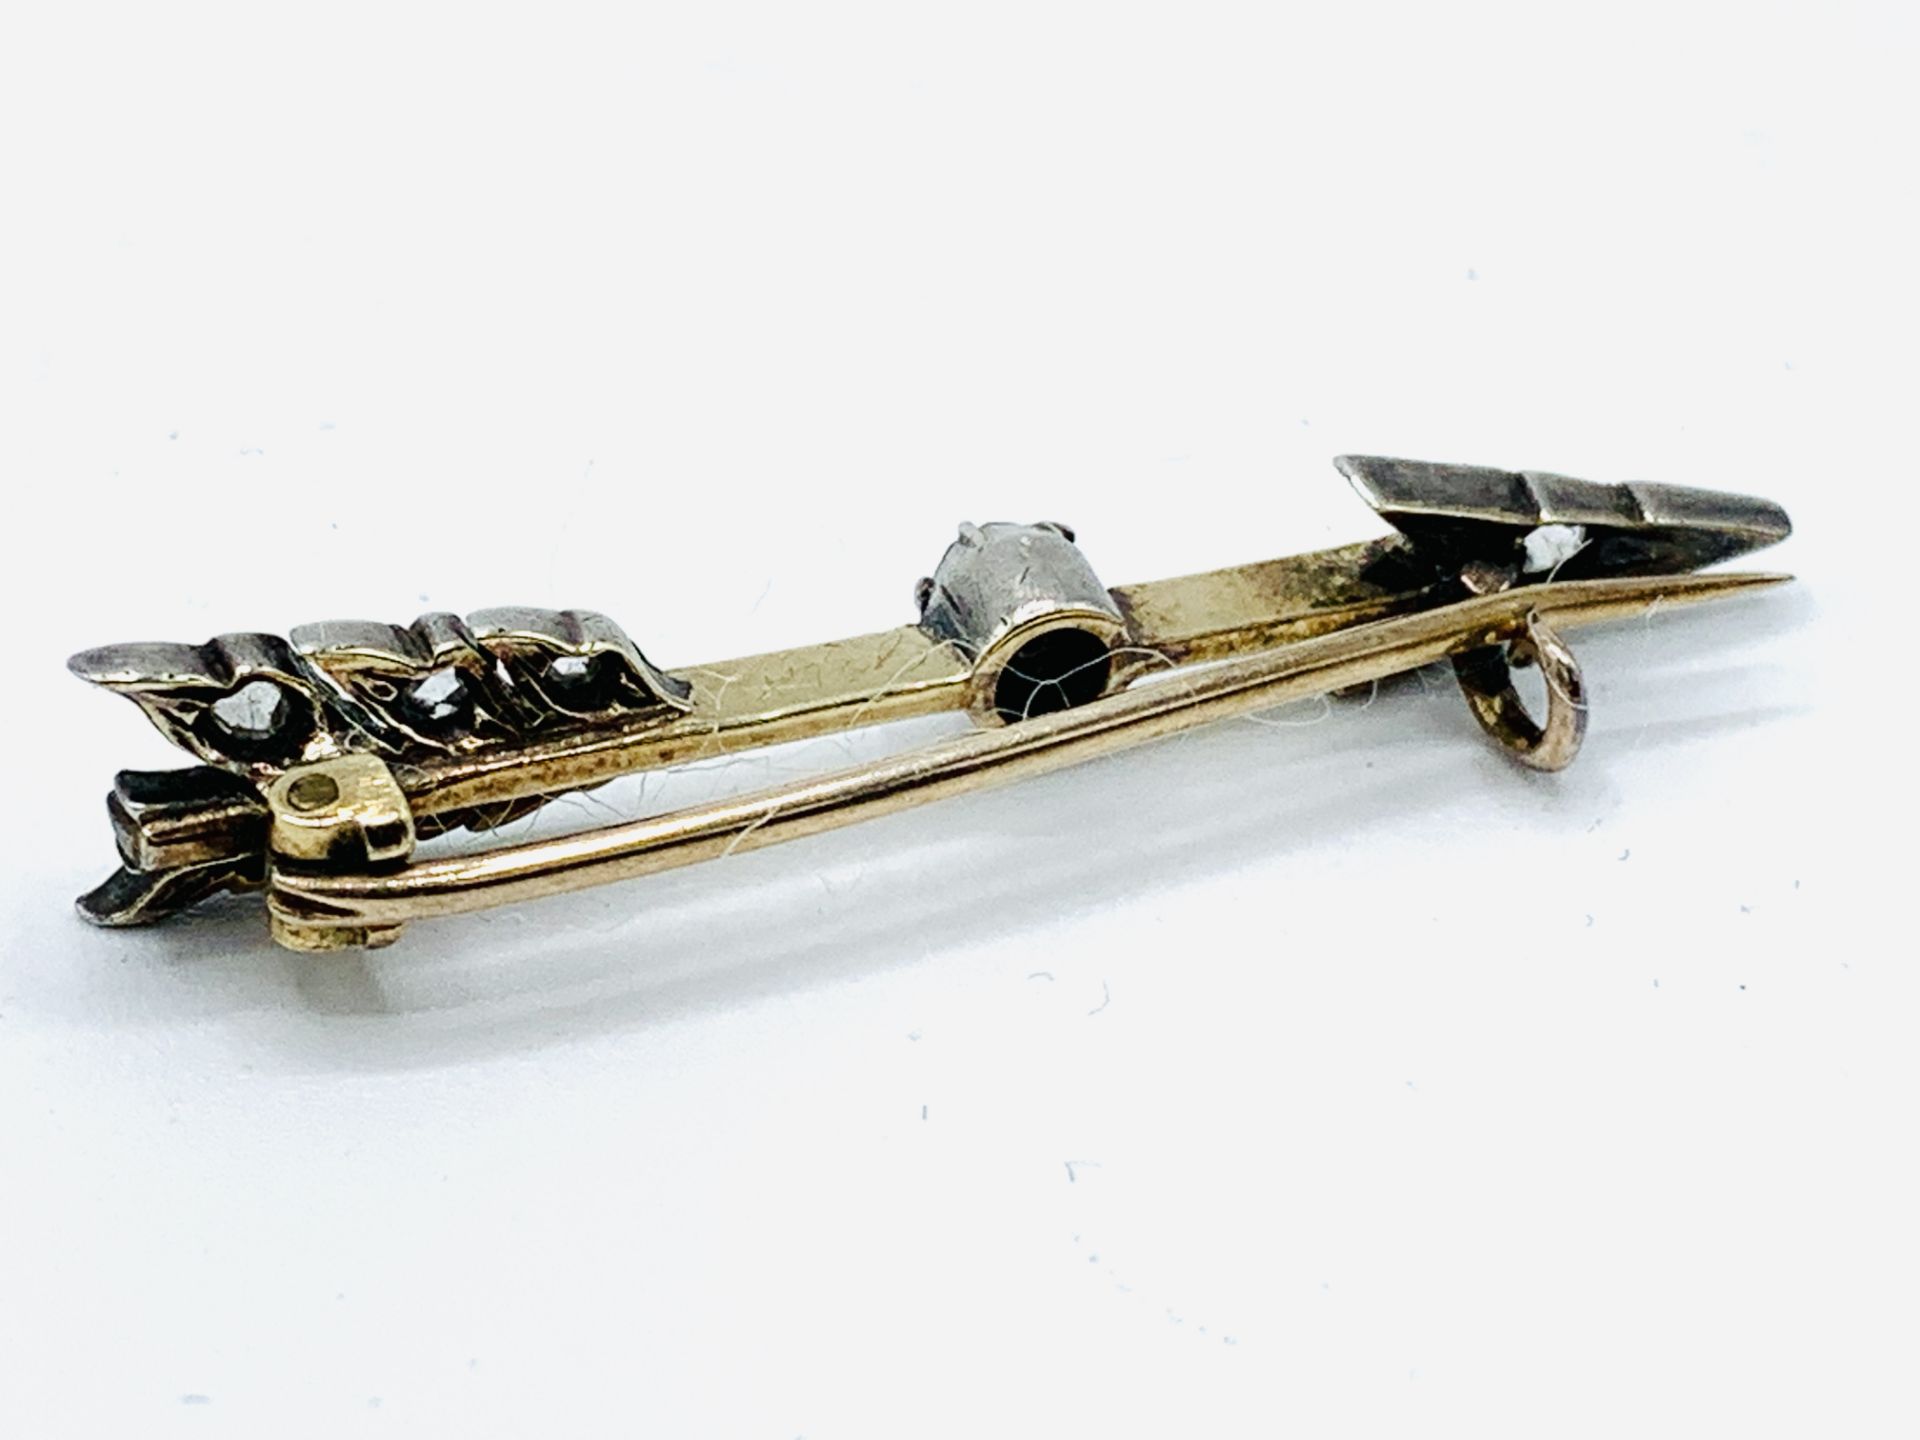 Victorian diamond brooch in the shape of an arrow - Image 3 of 3